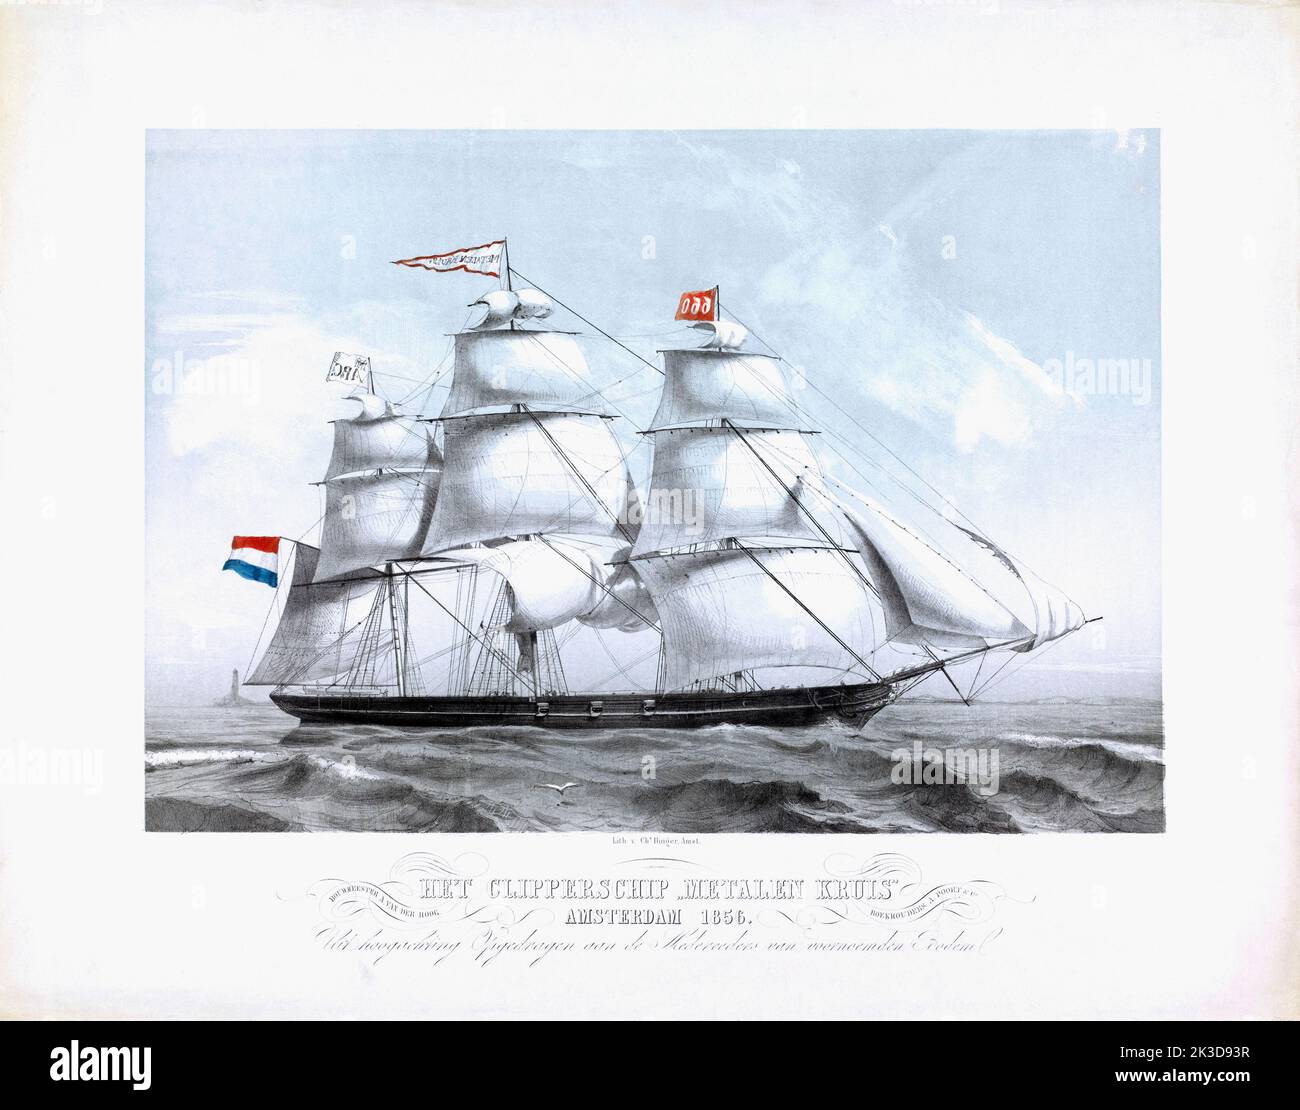 The Dutch clipper Metalen Kruis under full sail.  After a work by Charles Binger published in 1856. Stock Photo